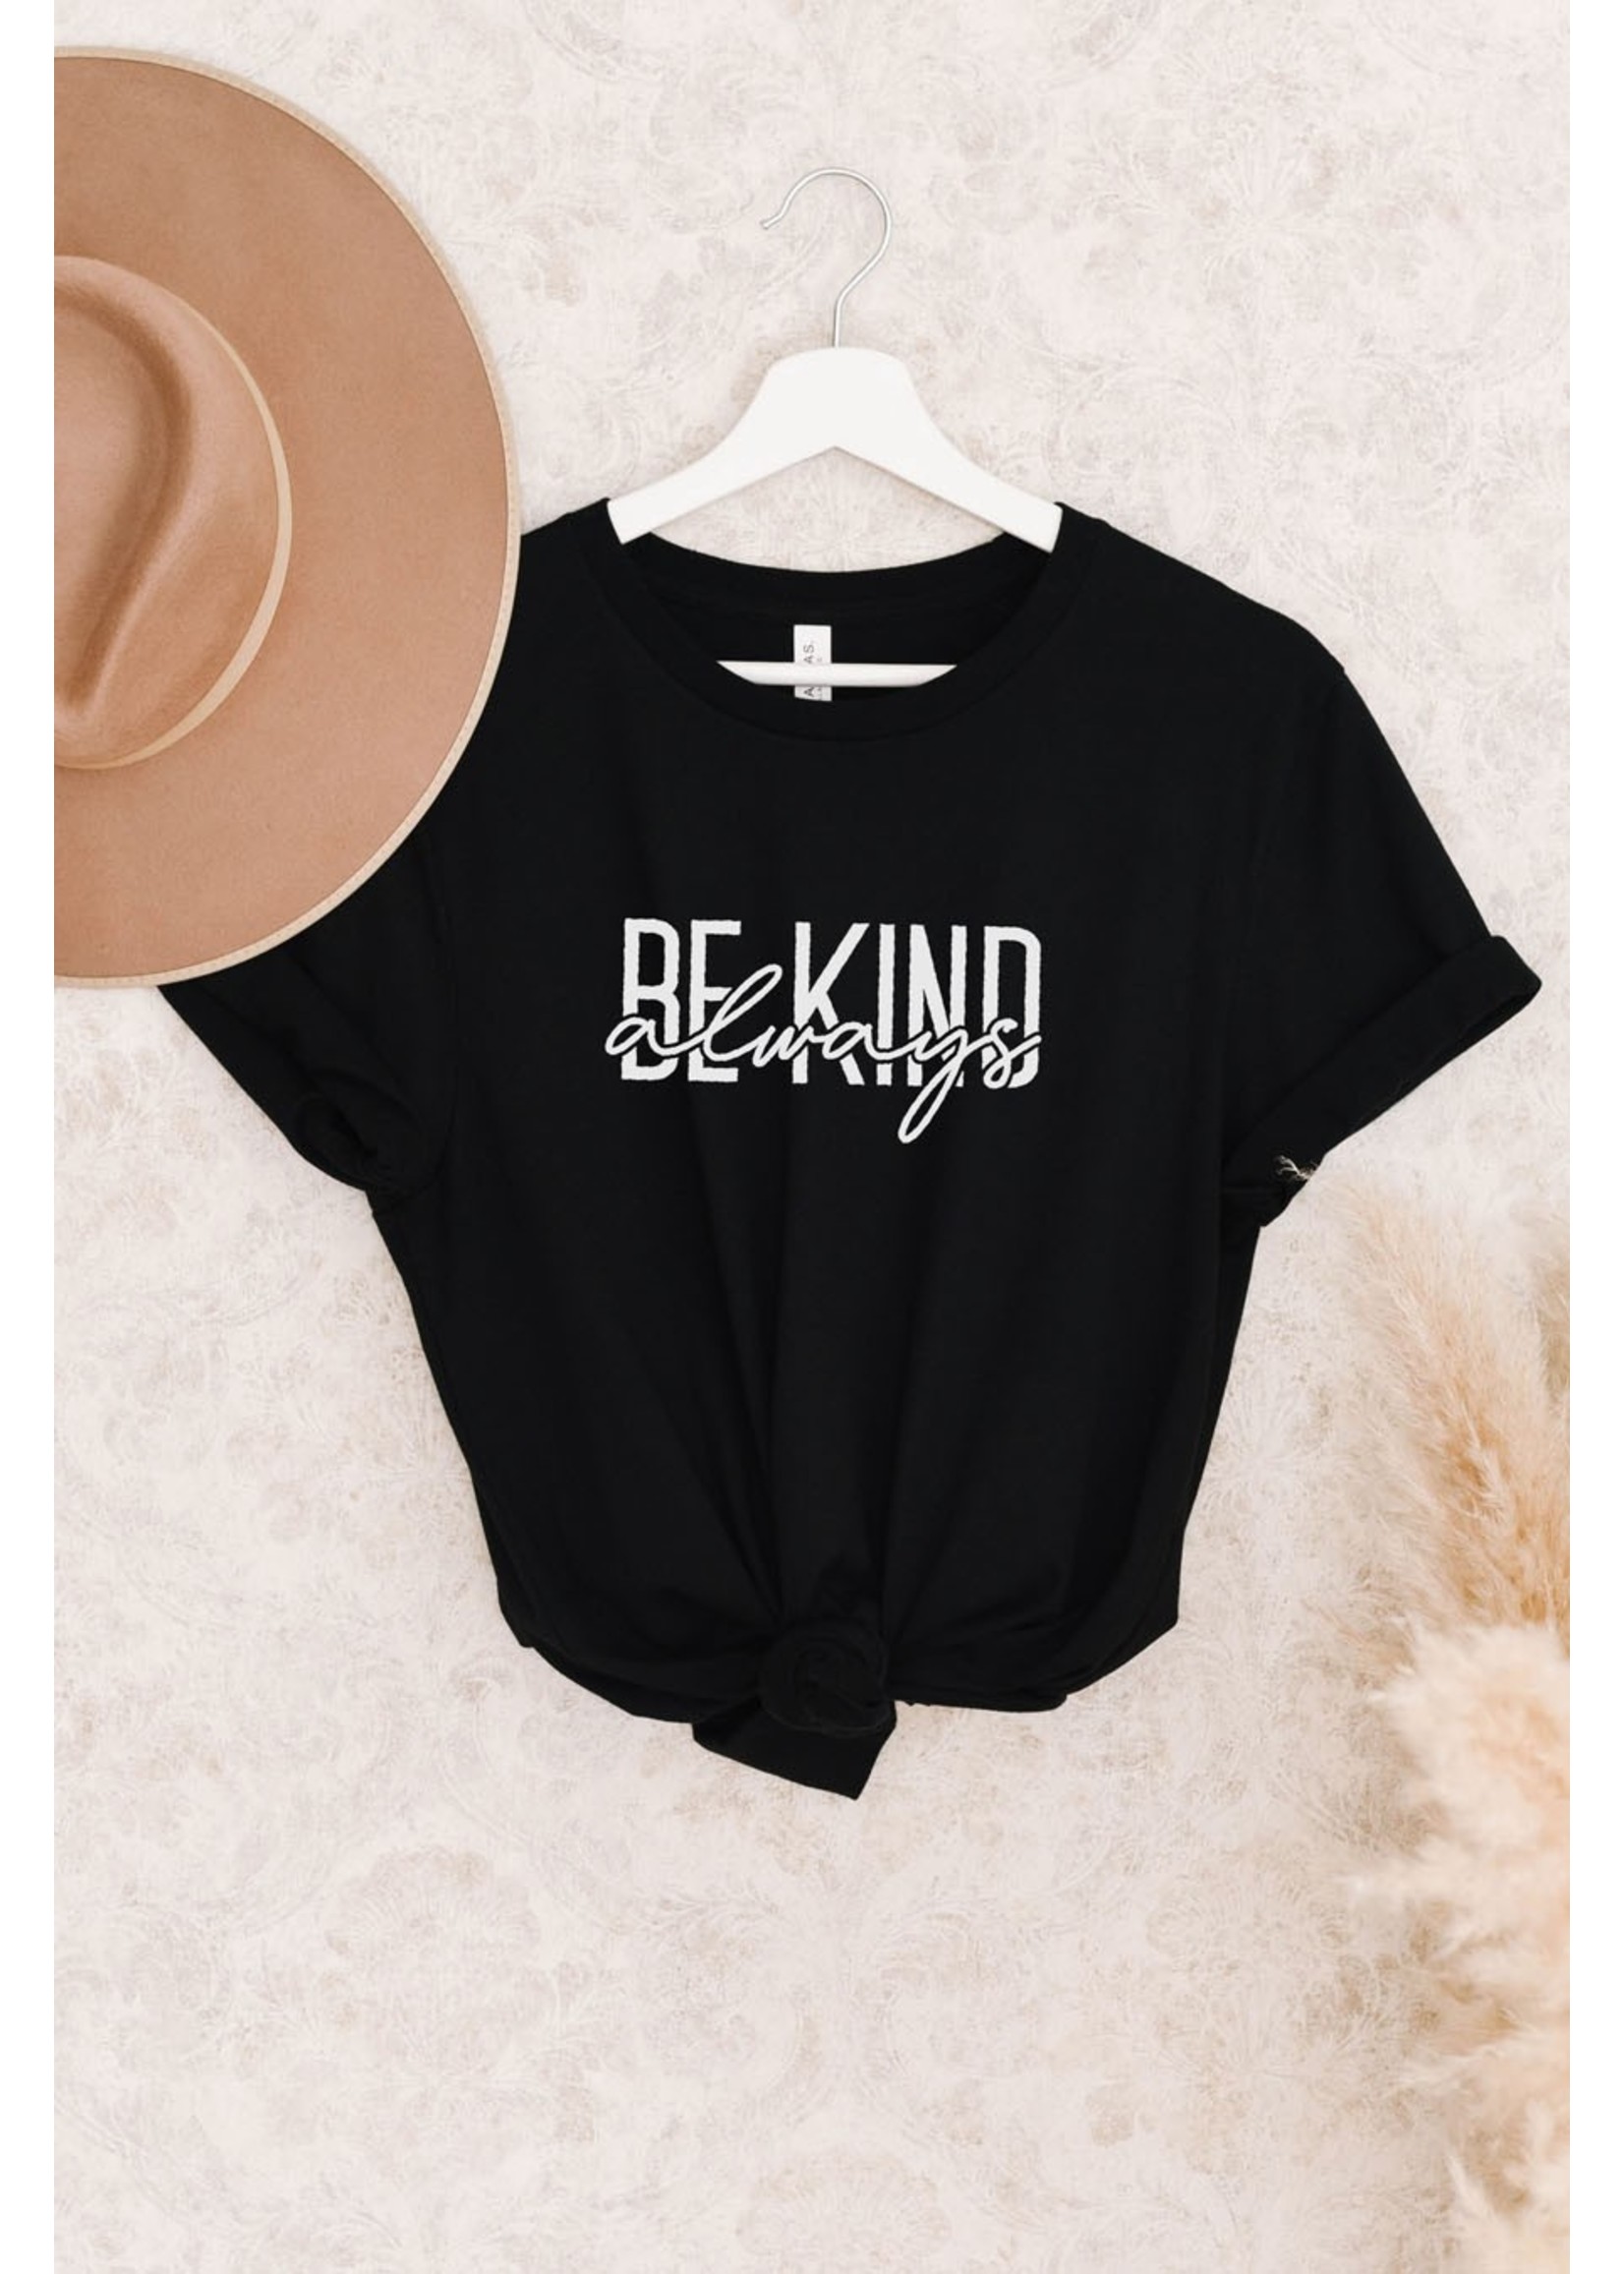 The Be Kind Graphic Tee